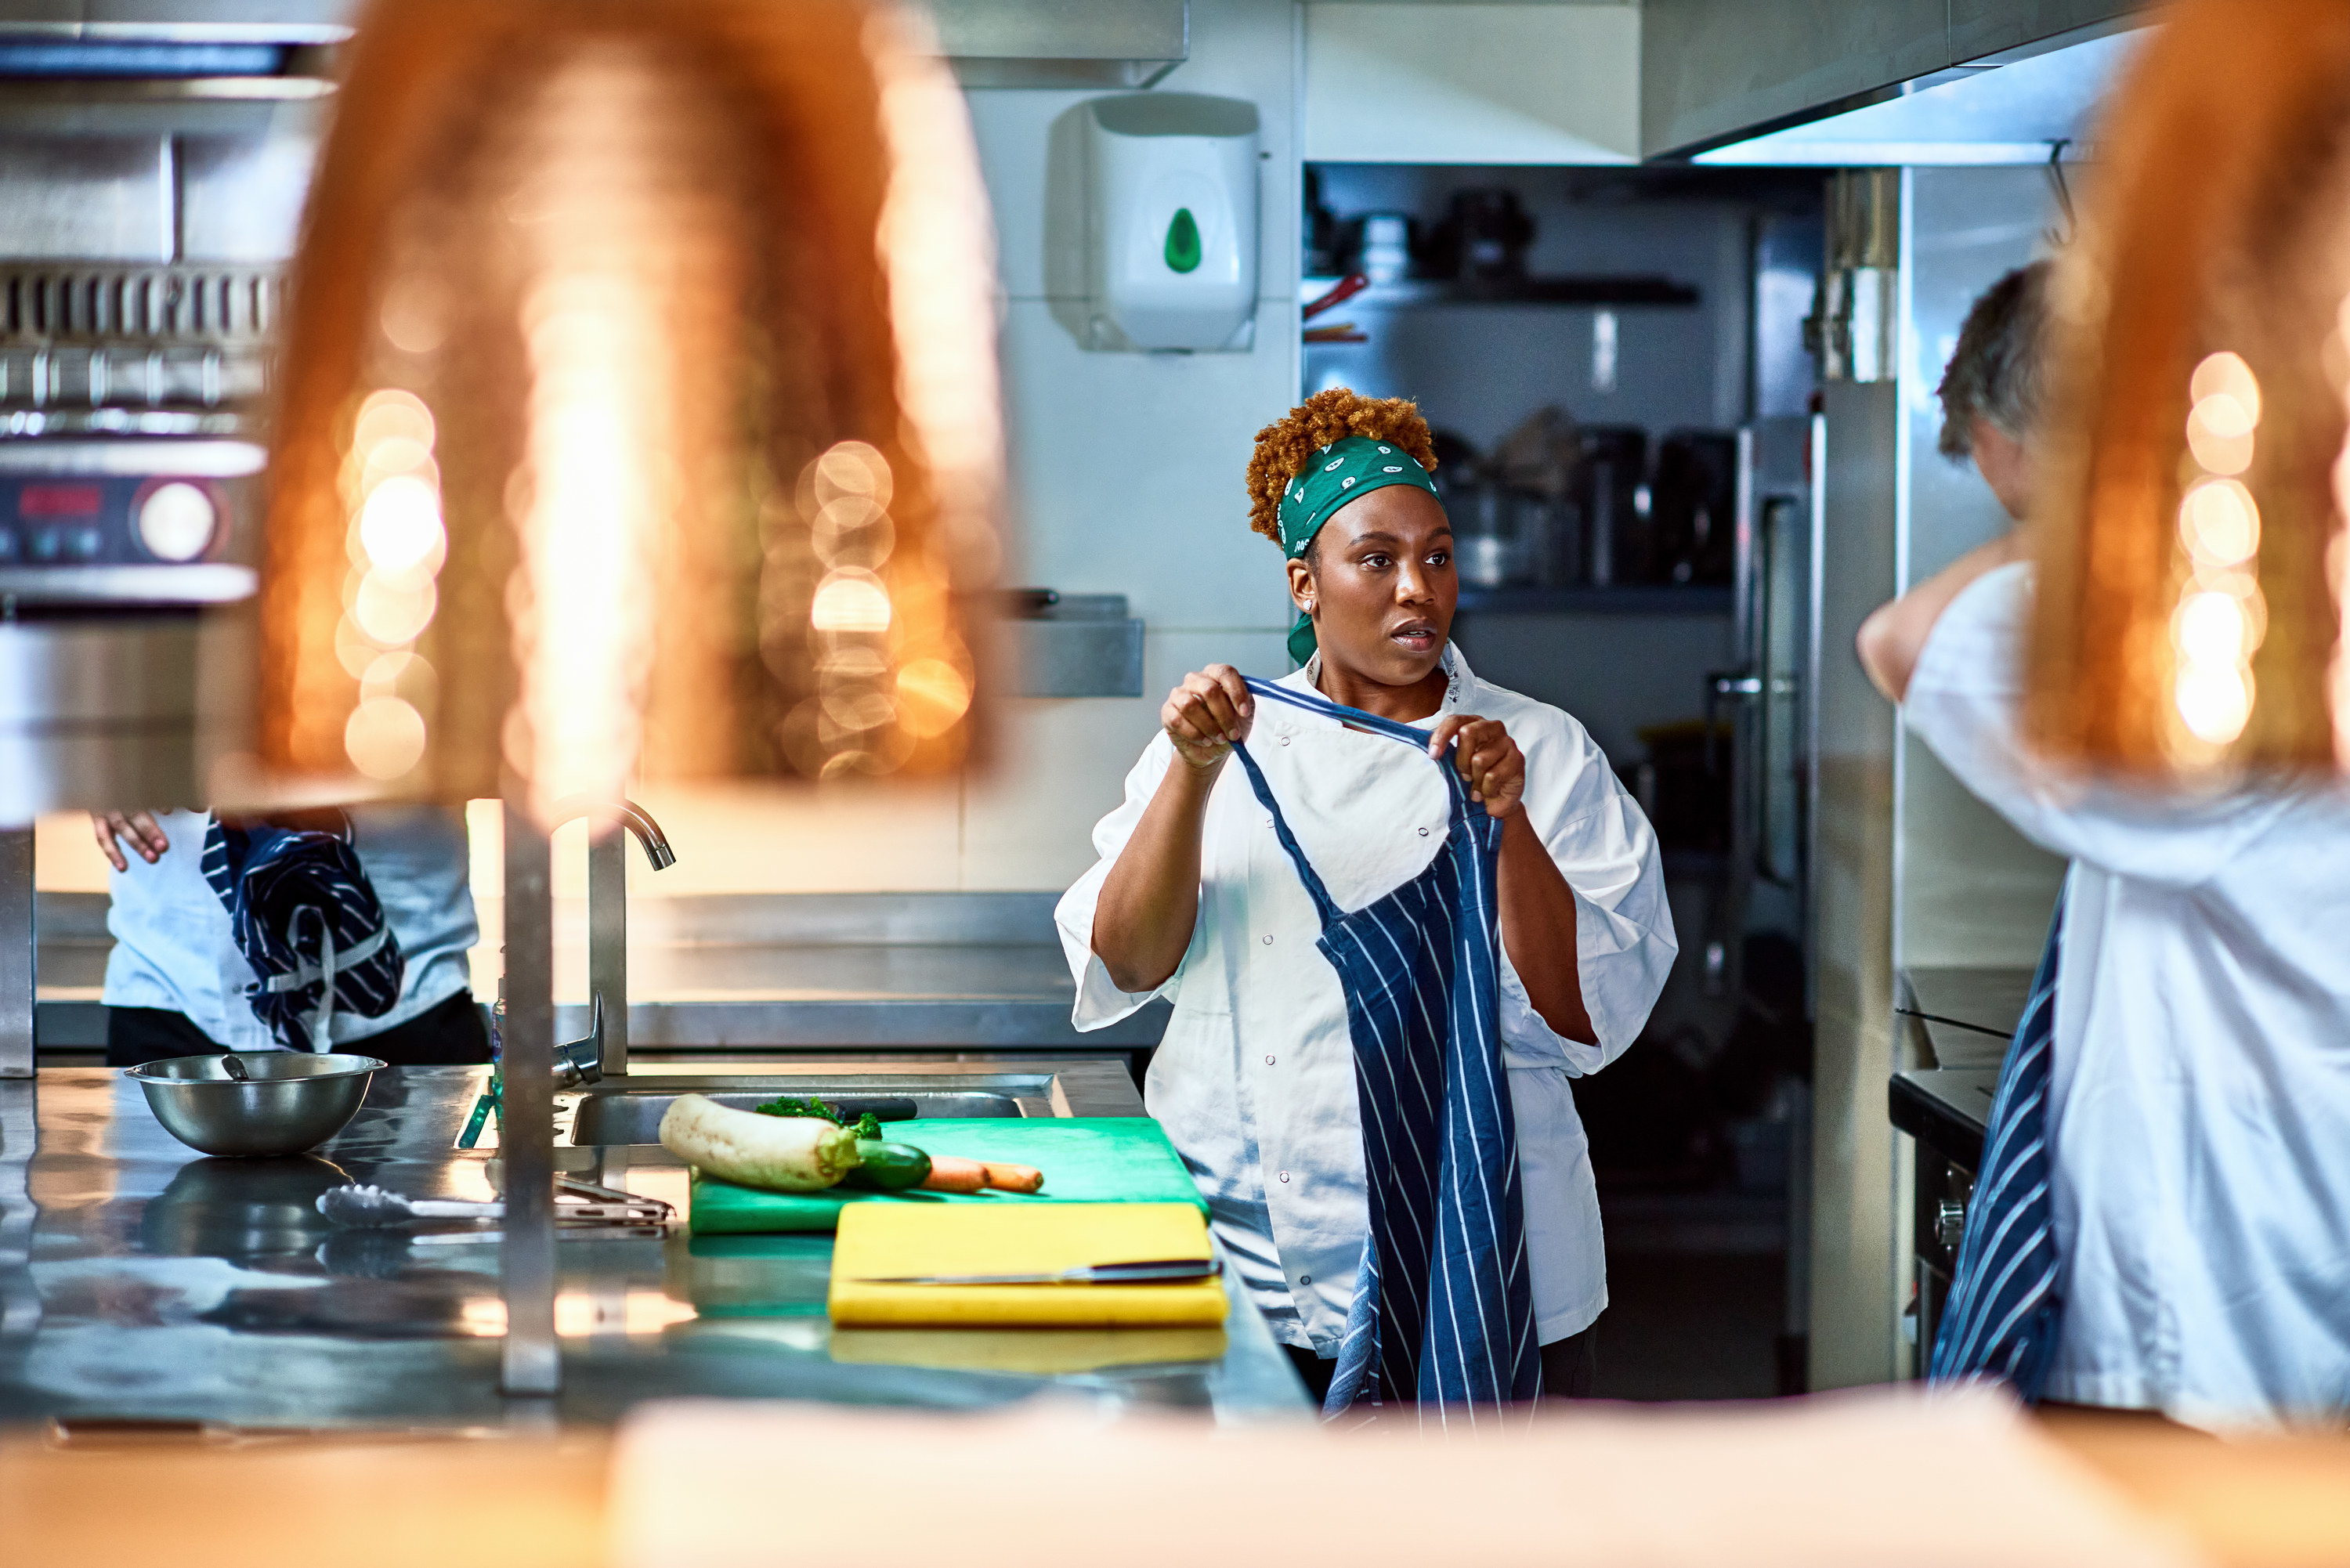 Woman puts on apron in restaurant kitchen and listens to colleague